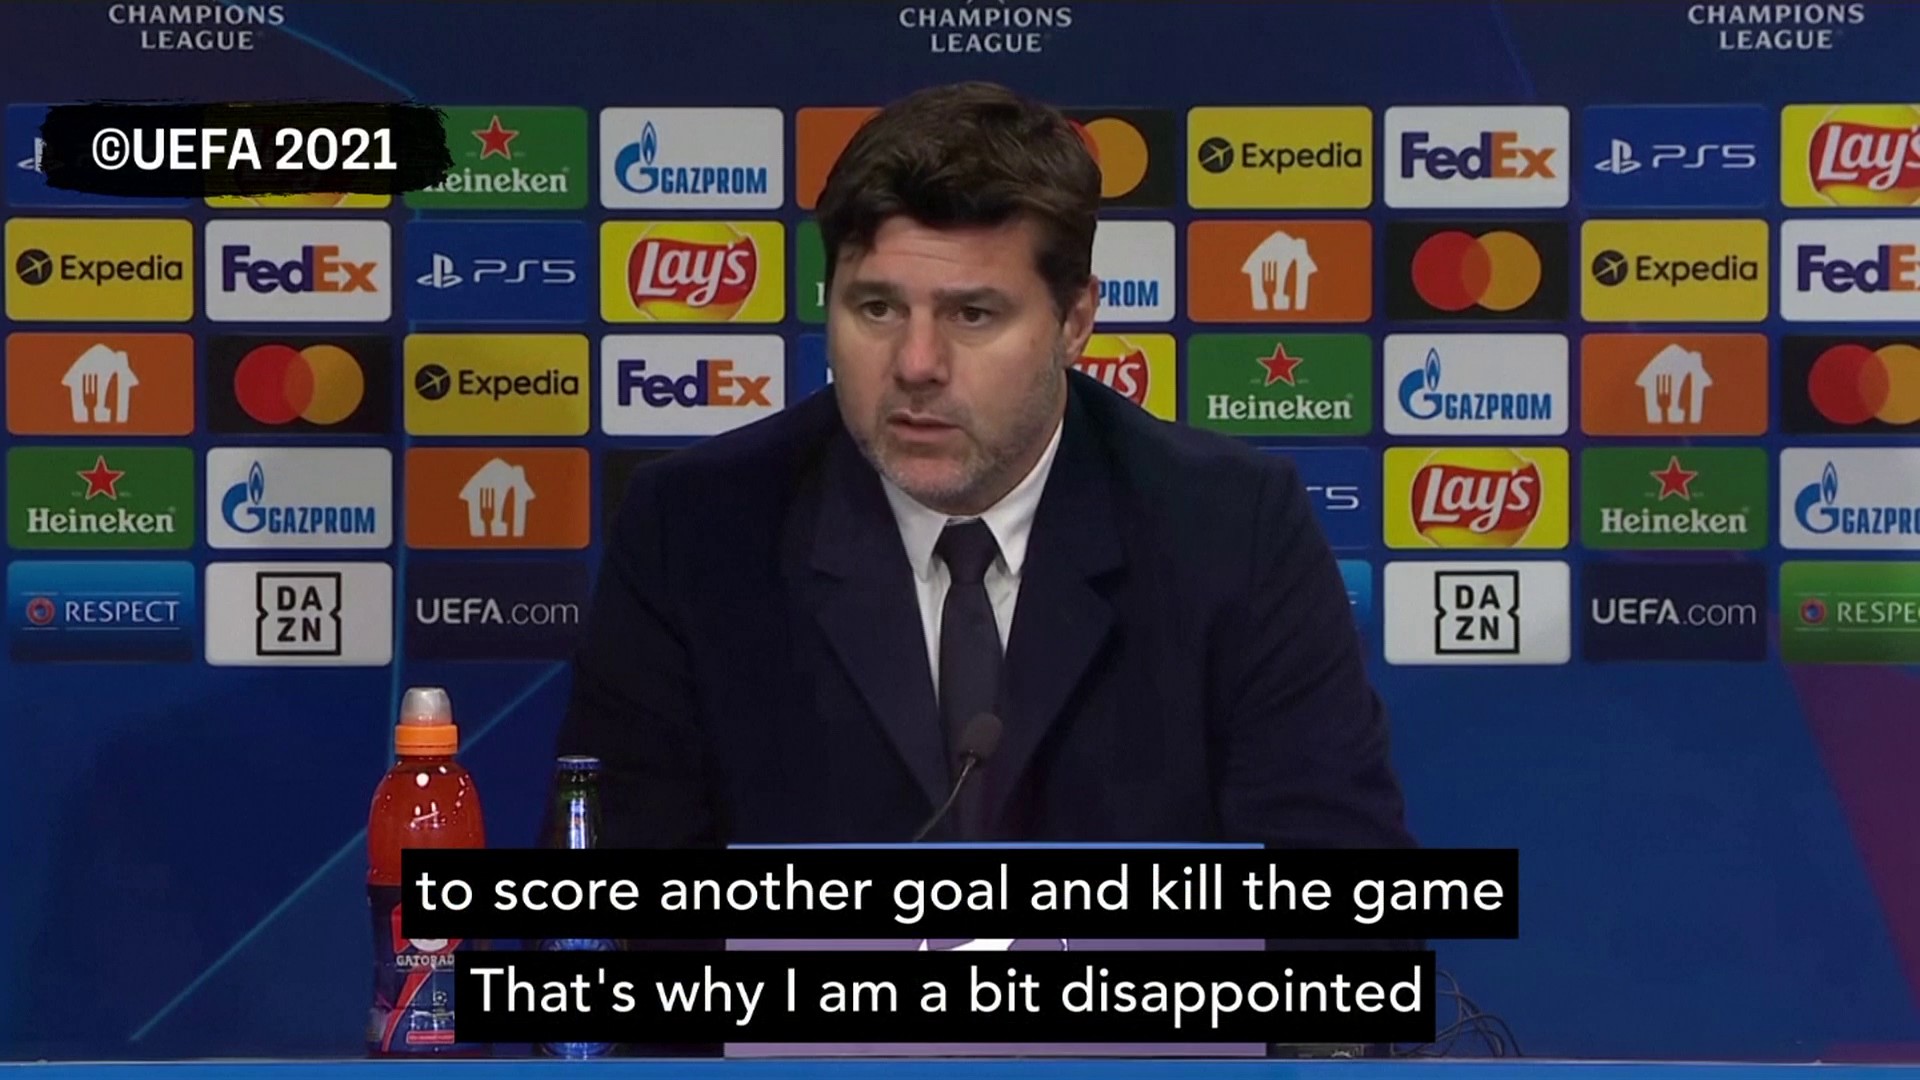 "Now Man City are first and we are second" Poch after draw with Leipzig